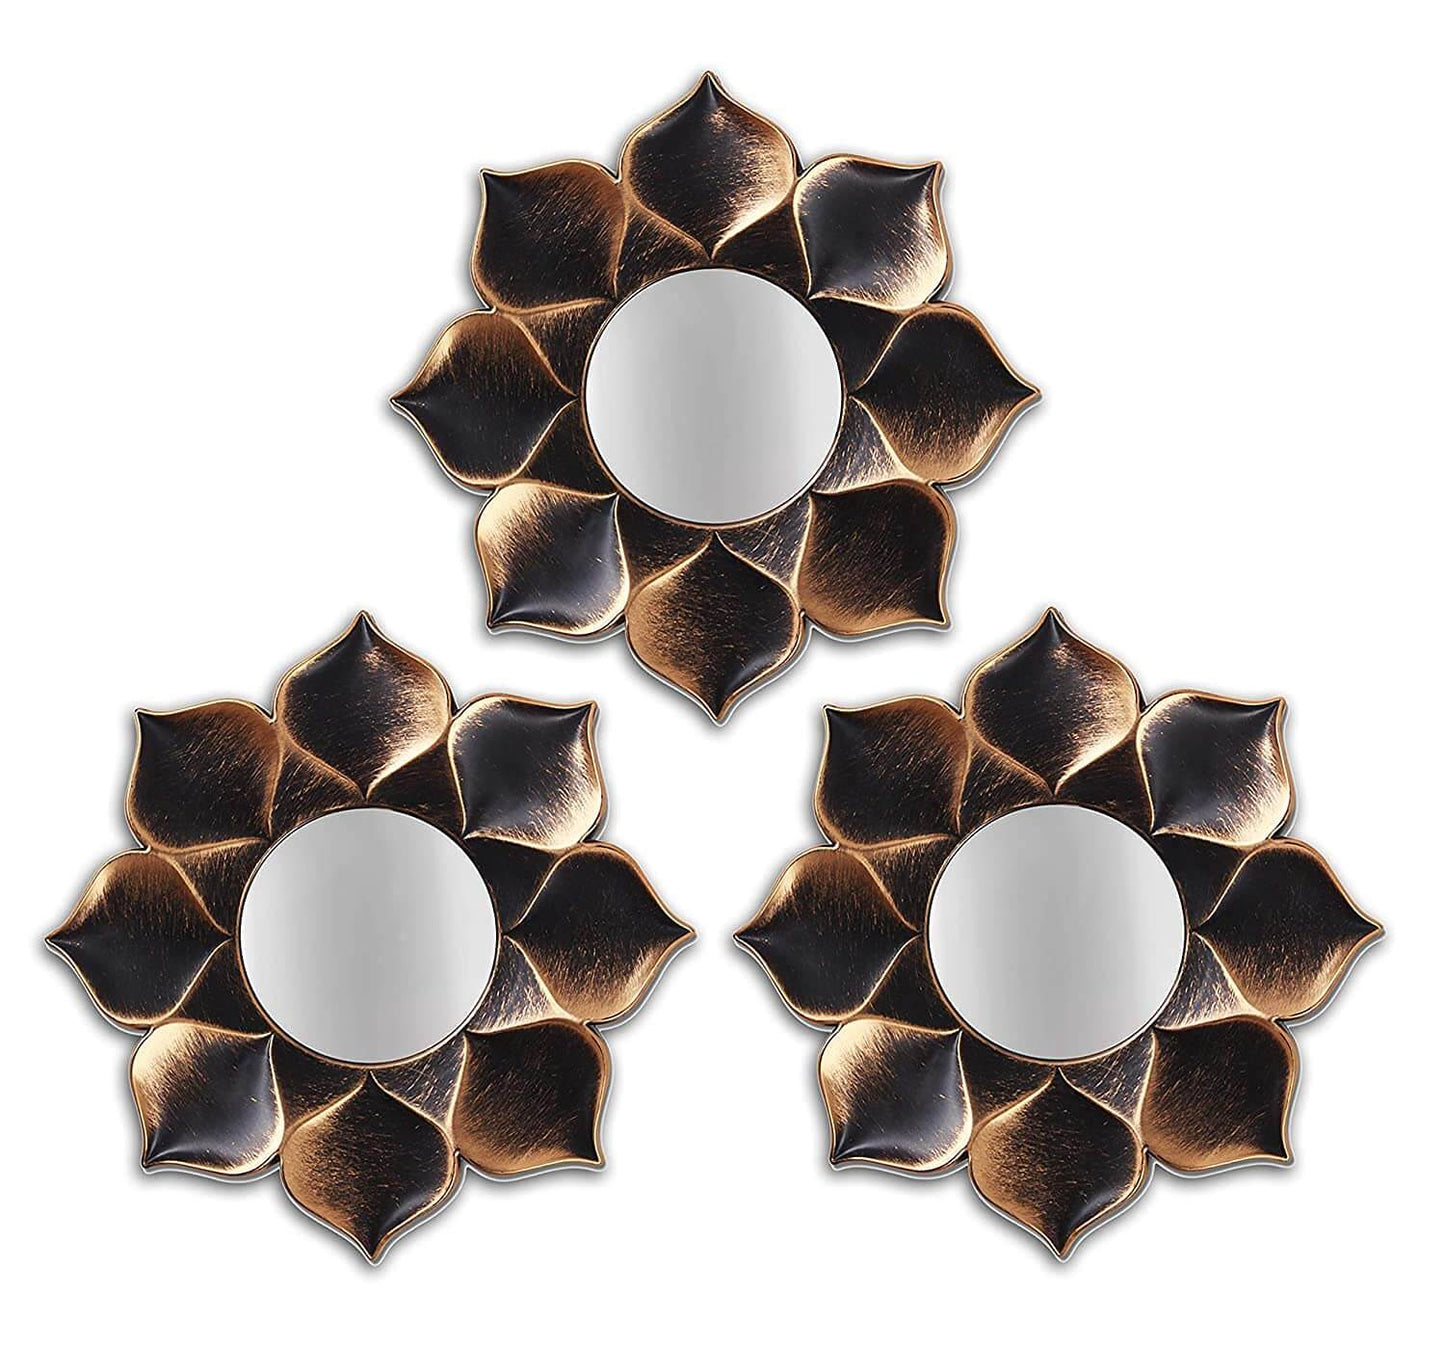 Pack of 3 - Lotus Petal Decorative Wall Mirror for Home & Decoration (Size - 9 x 9 inch) Mangal Fashions | Indian Home Decor and Craft